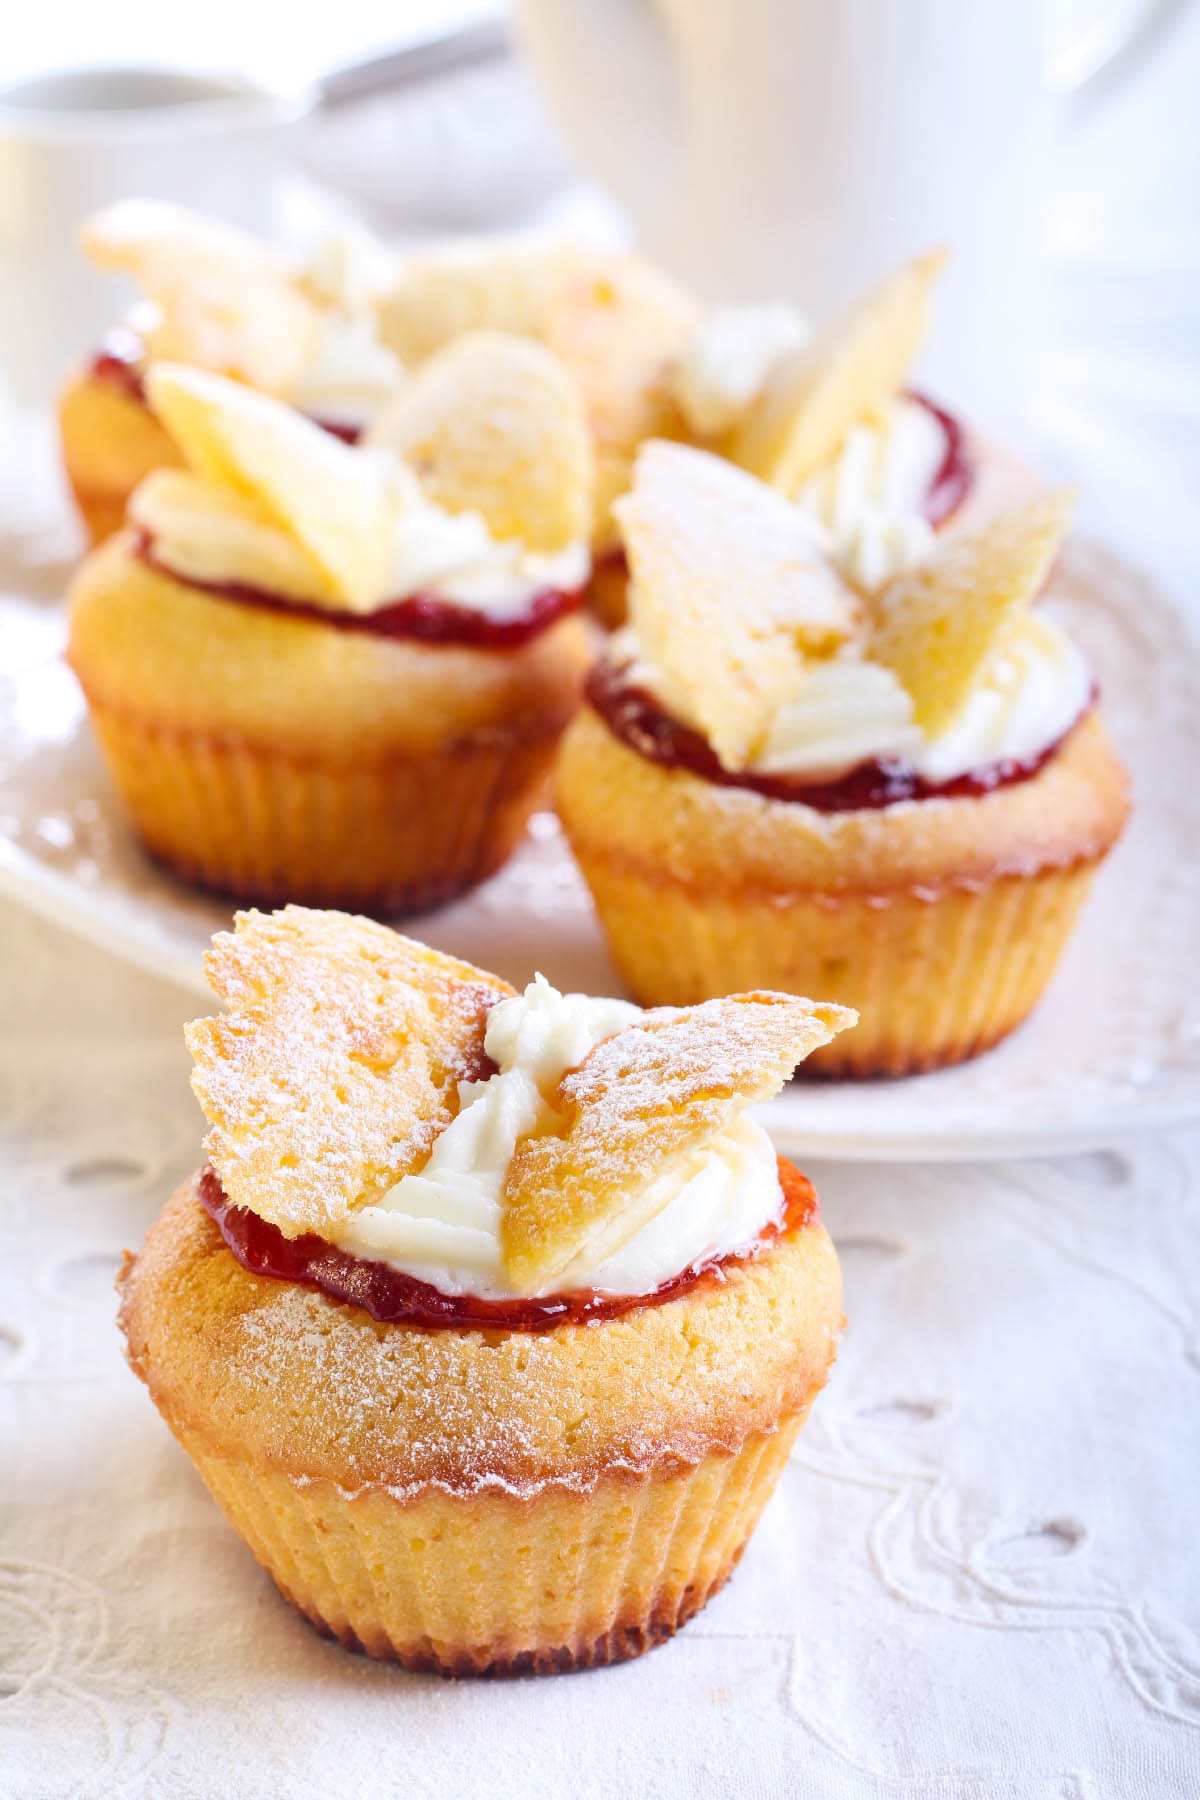 Photo of completed recipe for Butterfly Cakes with Jam and Cream